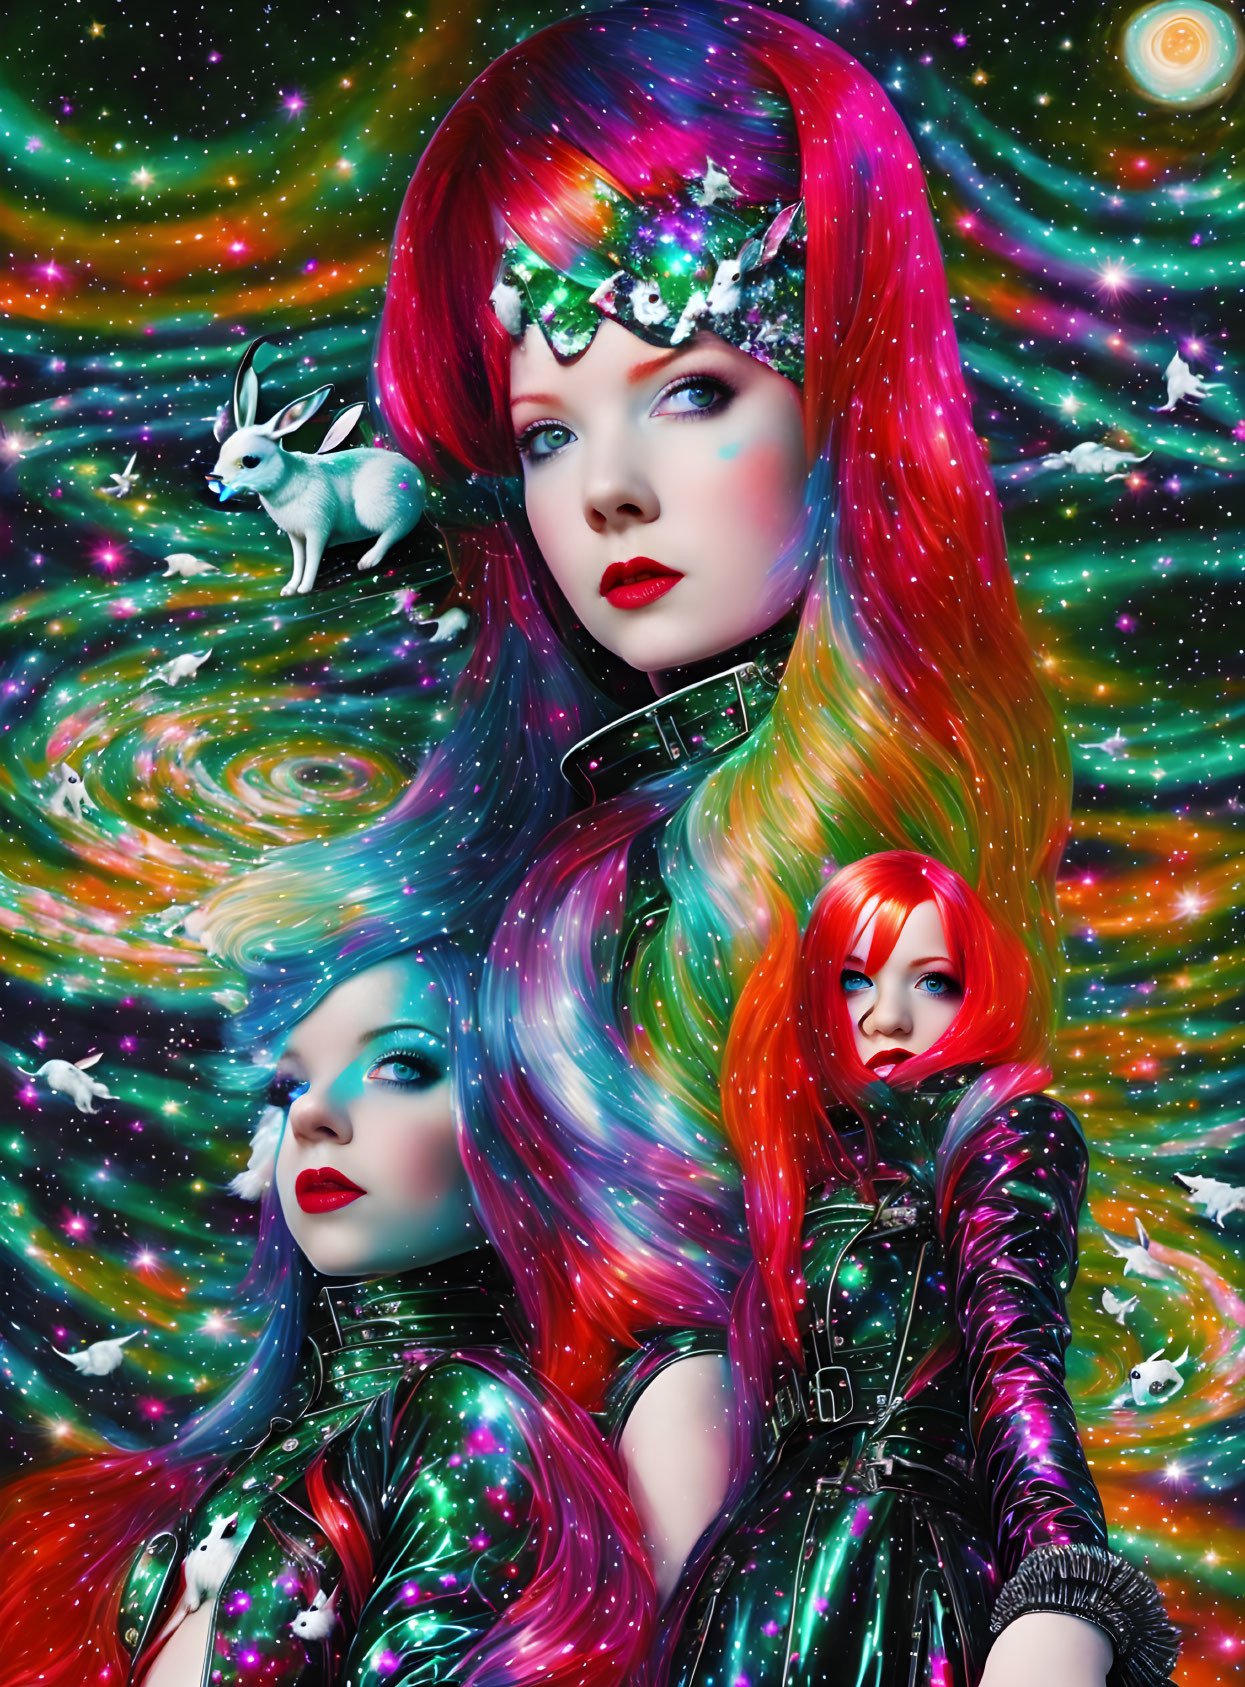 Colorful Futuristic Women with Rainbow Hair in Cosmic Setting